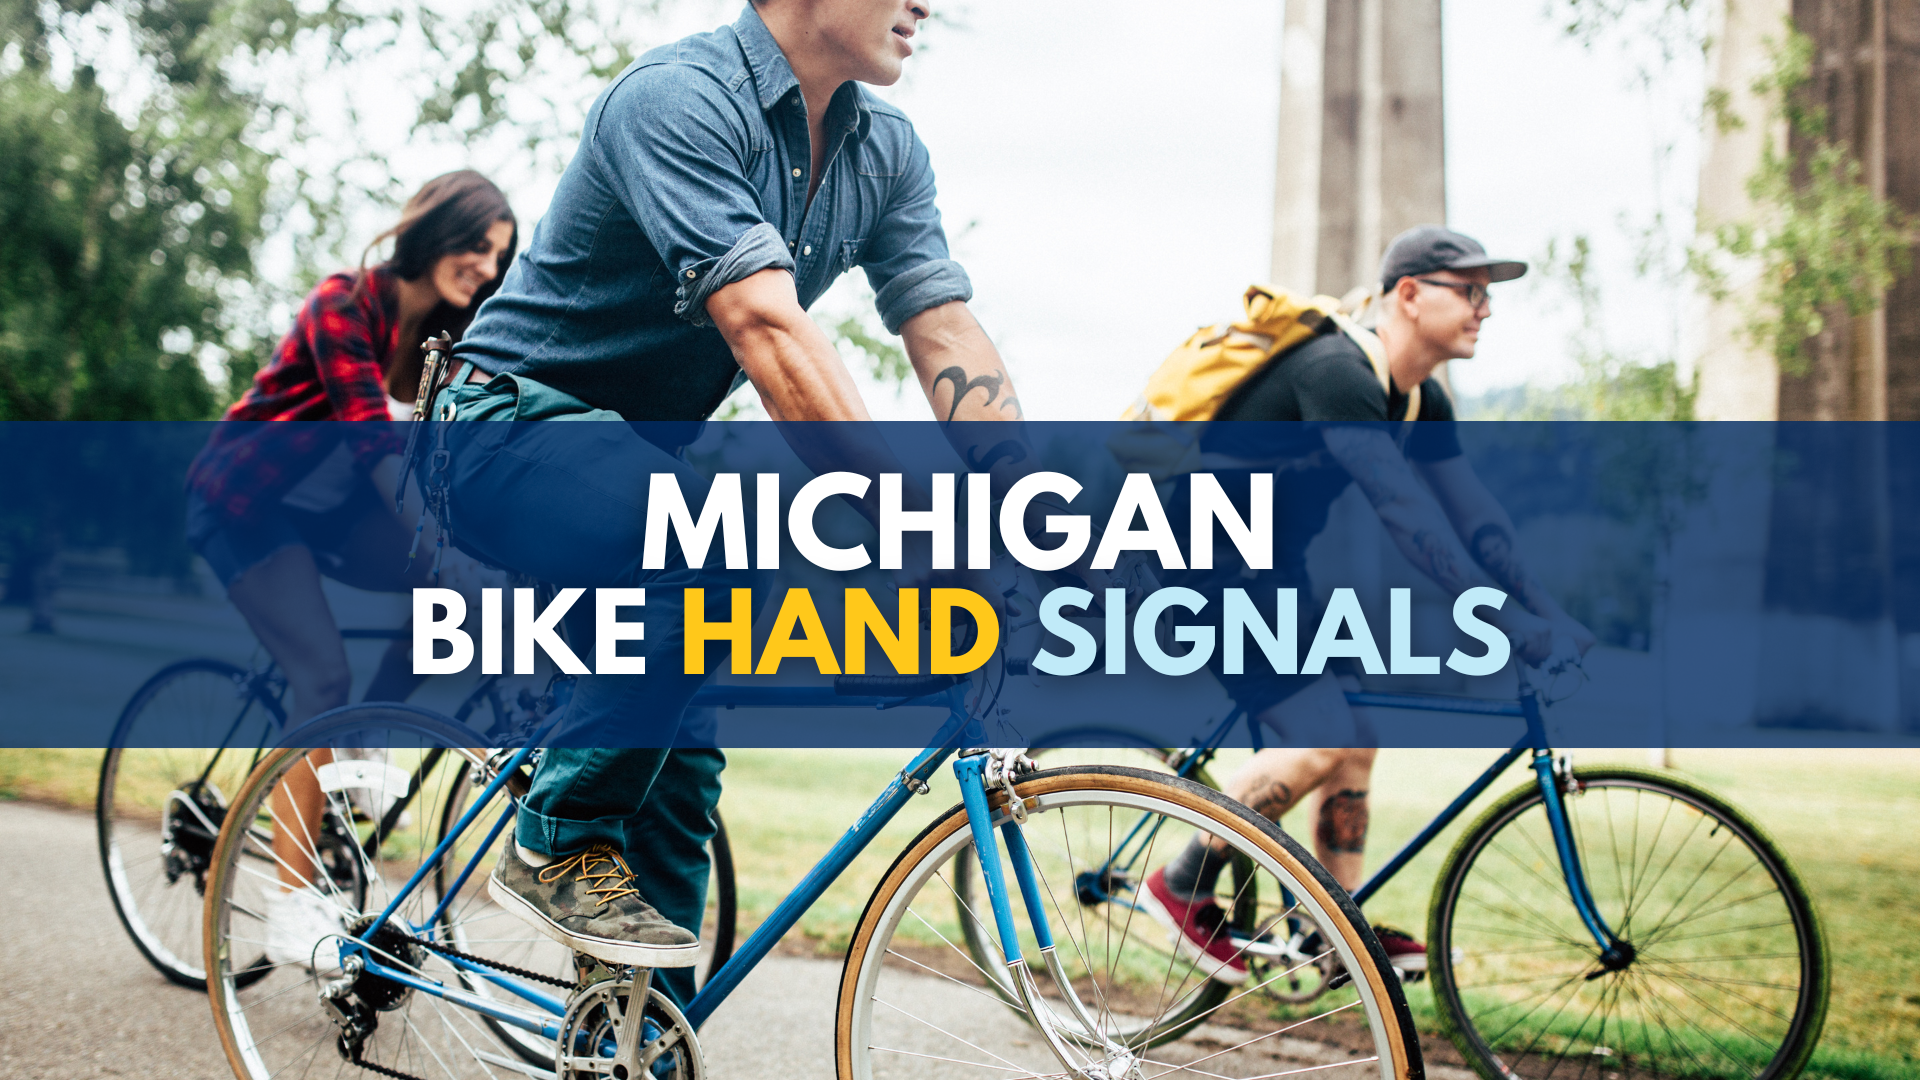 Michigan bike hand signals: what you need to know